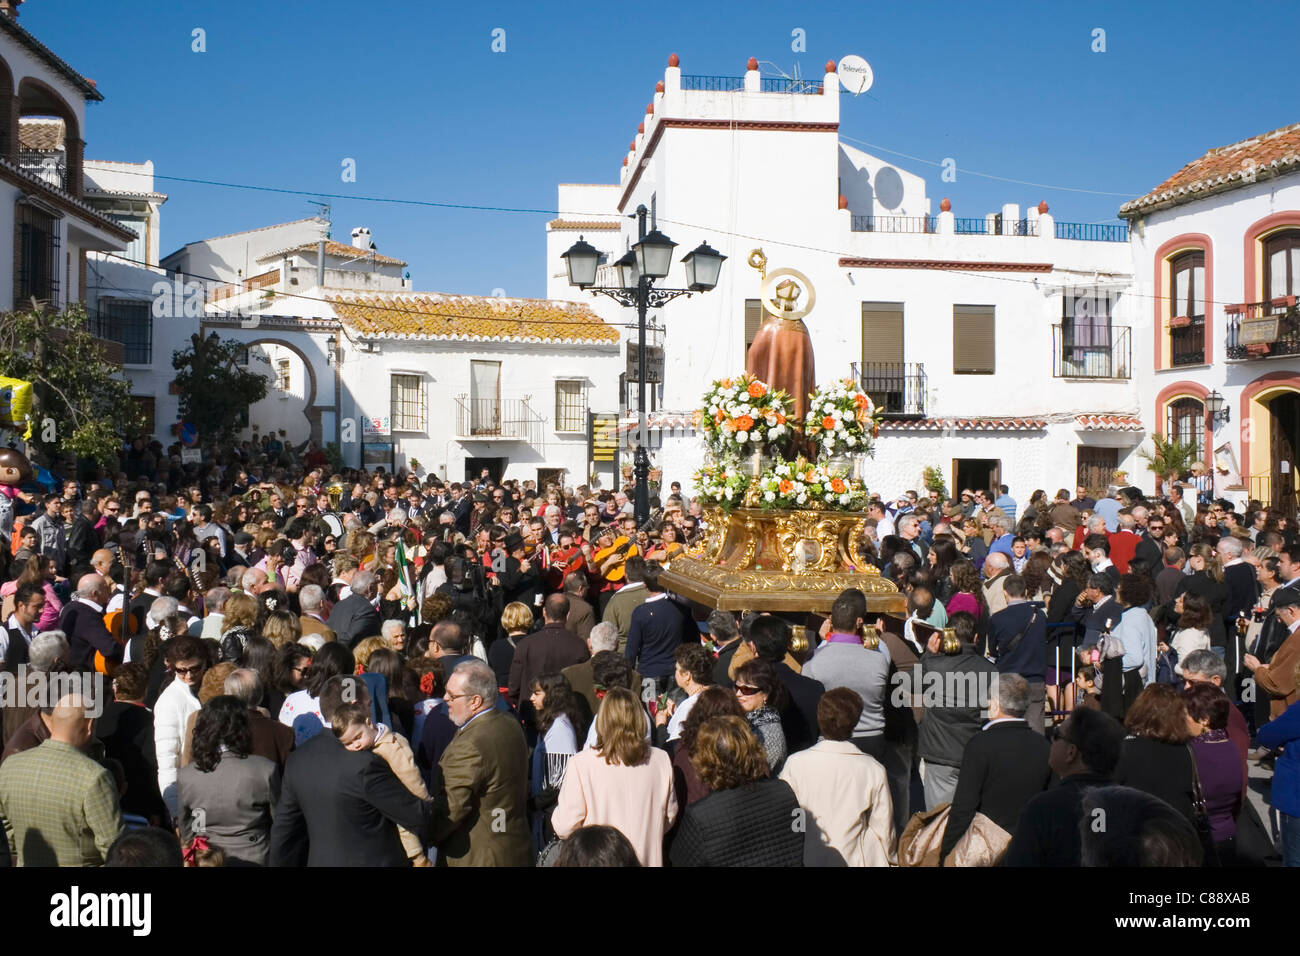 Celebration of the saint's day San Hilario de Poitiers, villagers carrying the saint on their shoulders around the village. Stock Photo